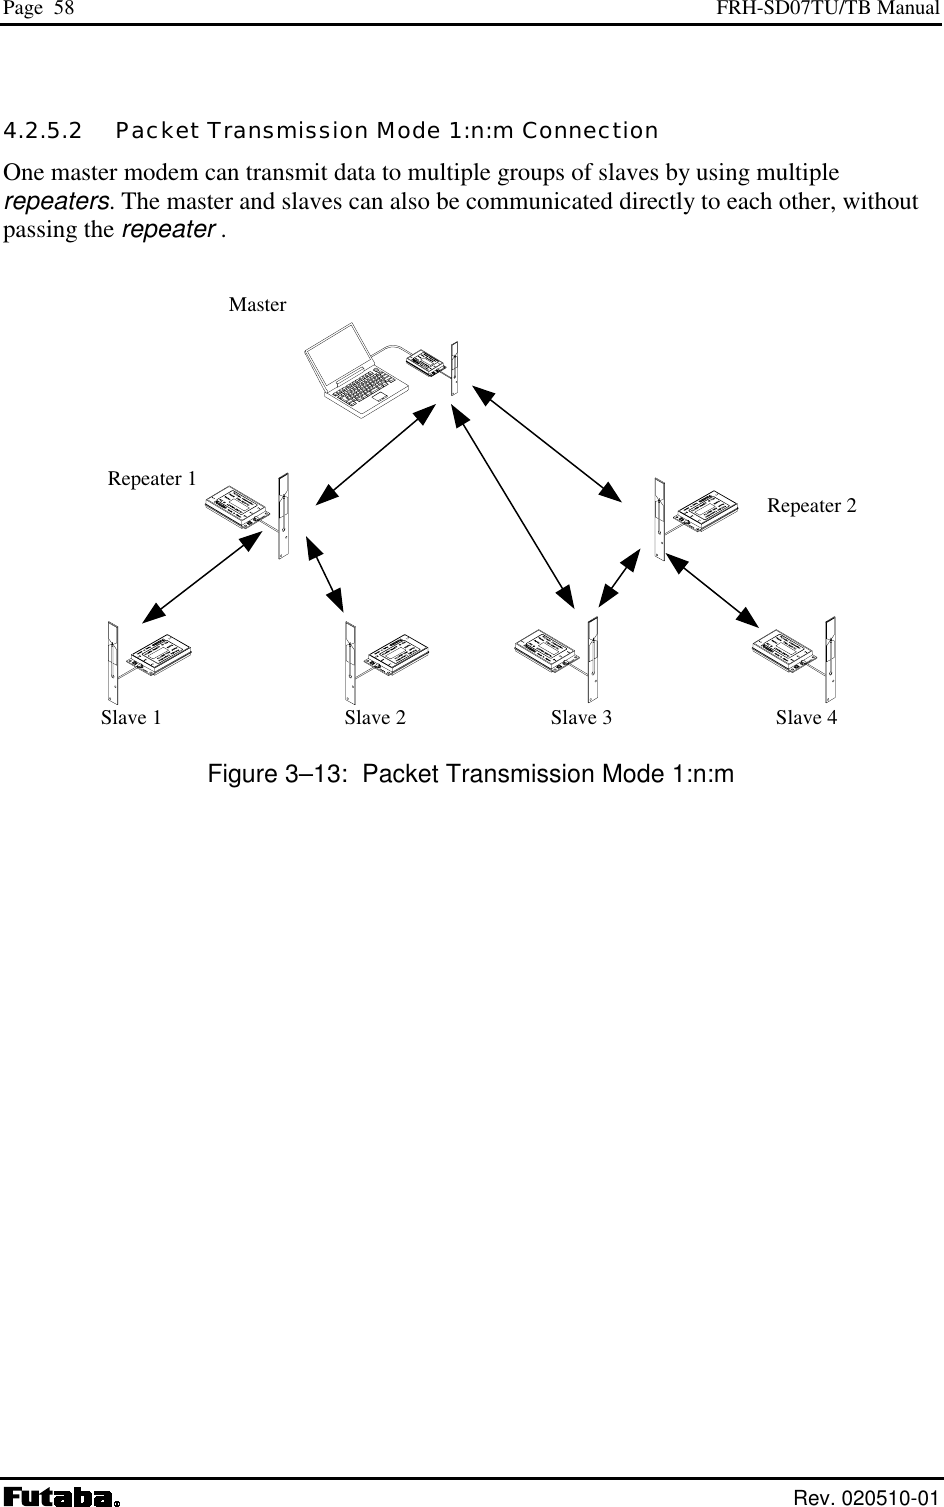 Page  58  FRH-SD07TU/TB Manual  Rev. 020510-01 4.2.5.2   Packet Transmission Mode 1:n:m Connection One master modem can transmit data to multiple groups of slaves by using multiple repeaters. The master and slaves can also be communicated directly to each other, without passing the repeater .                                                                                                                                                                                    Figure 3–13:  Packet Transmission Mode 1:n:m Repeater 2 Repeater 1 Slave 1  Slave 2  Slave 3  Slave 4 Master 